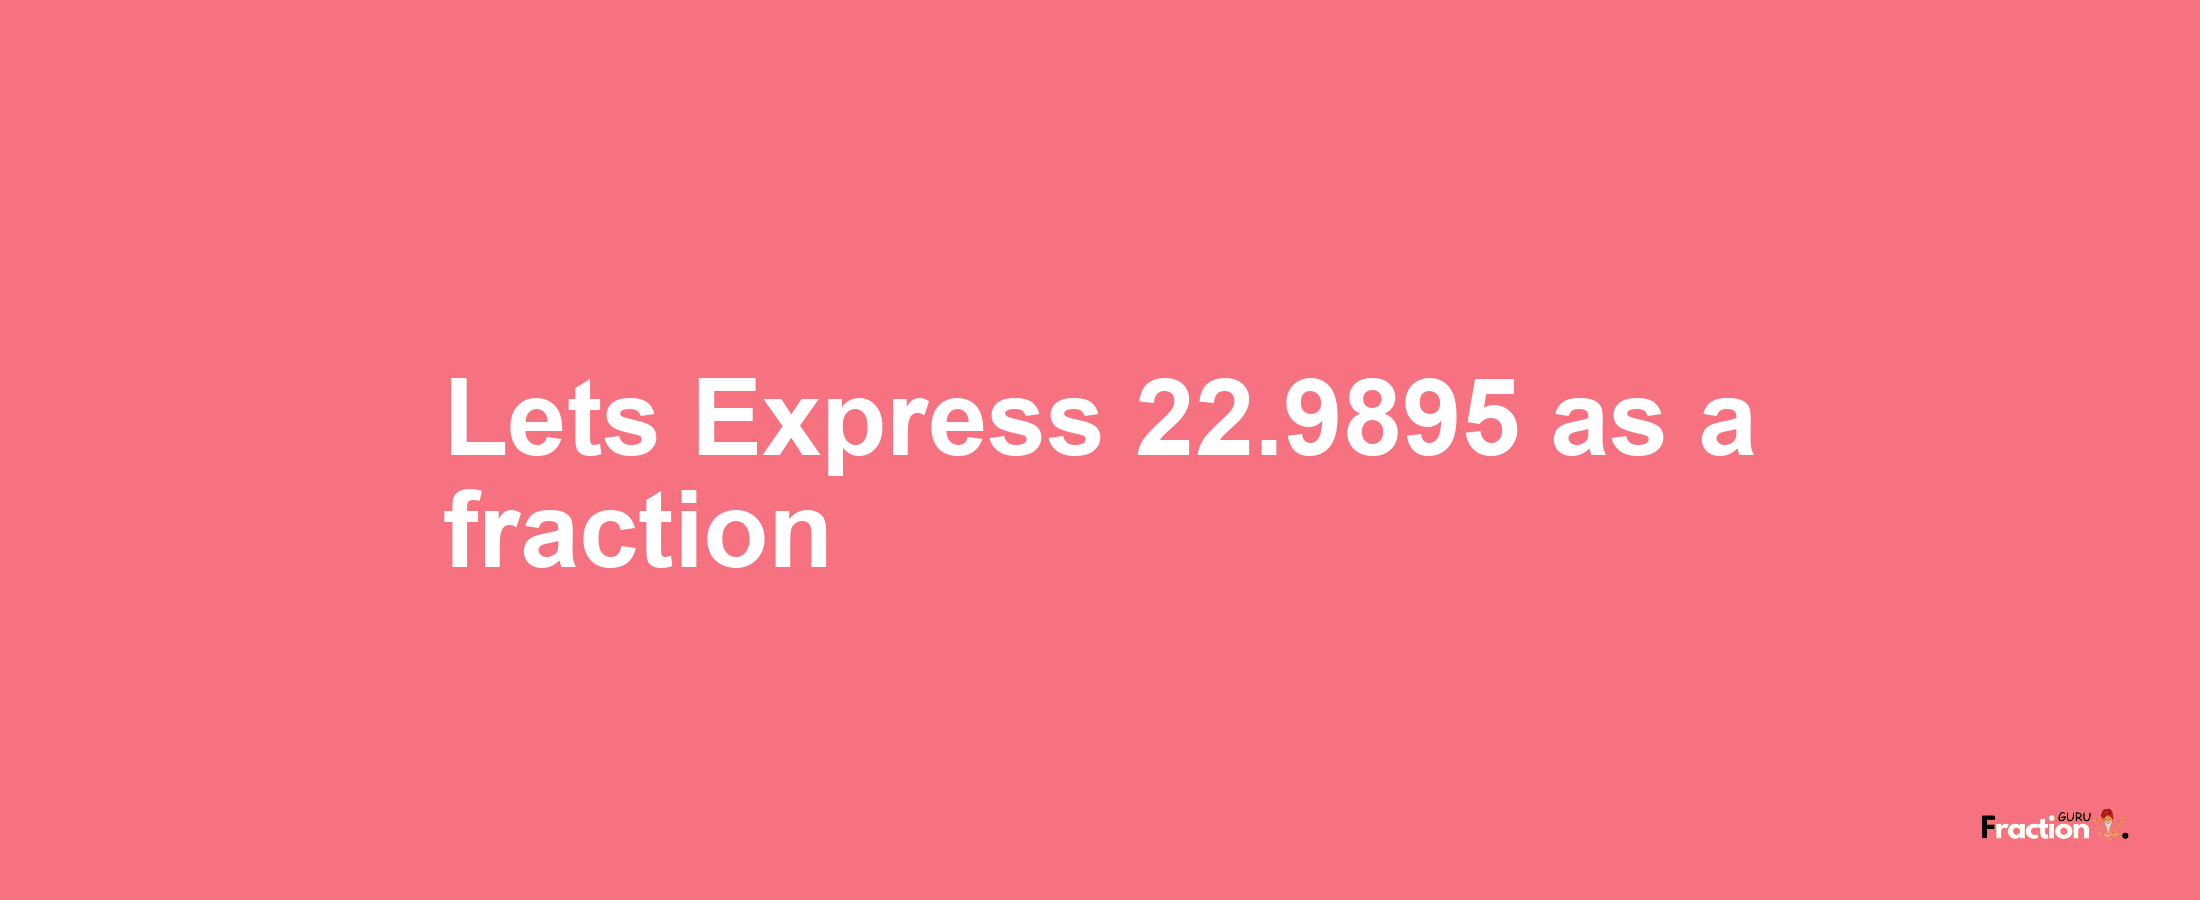 Lets Express 22.9895 as afraction